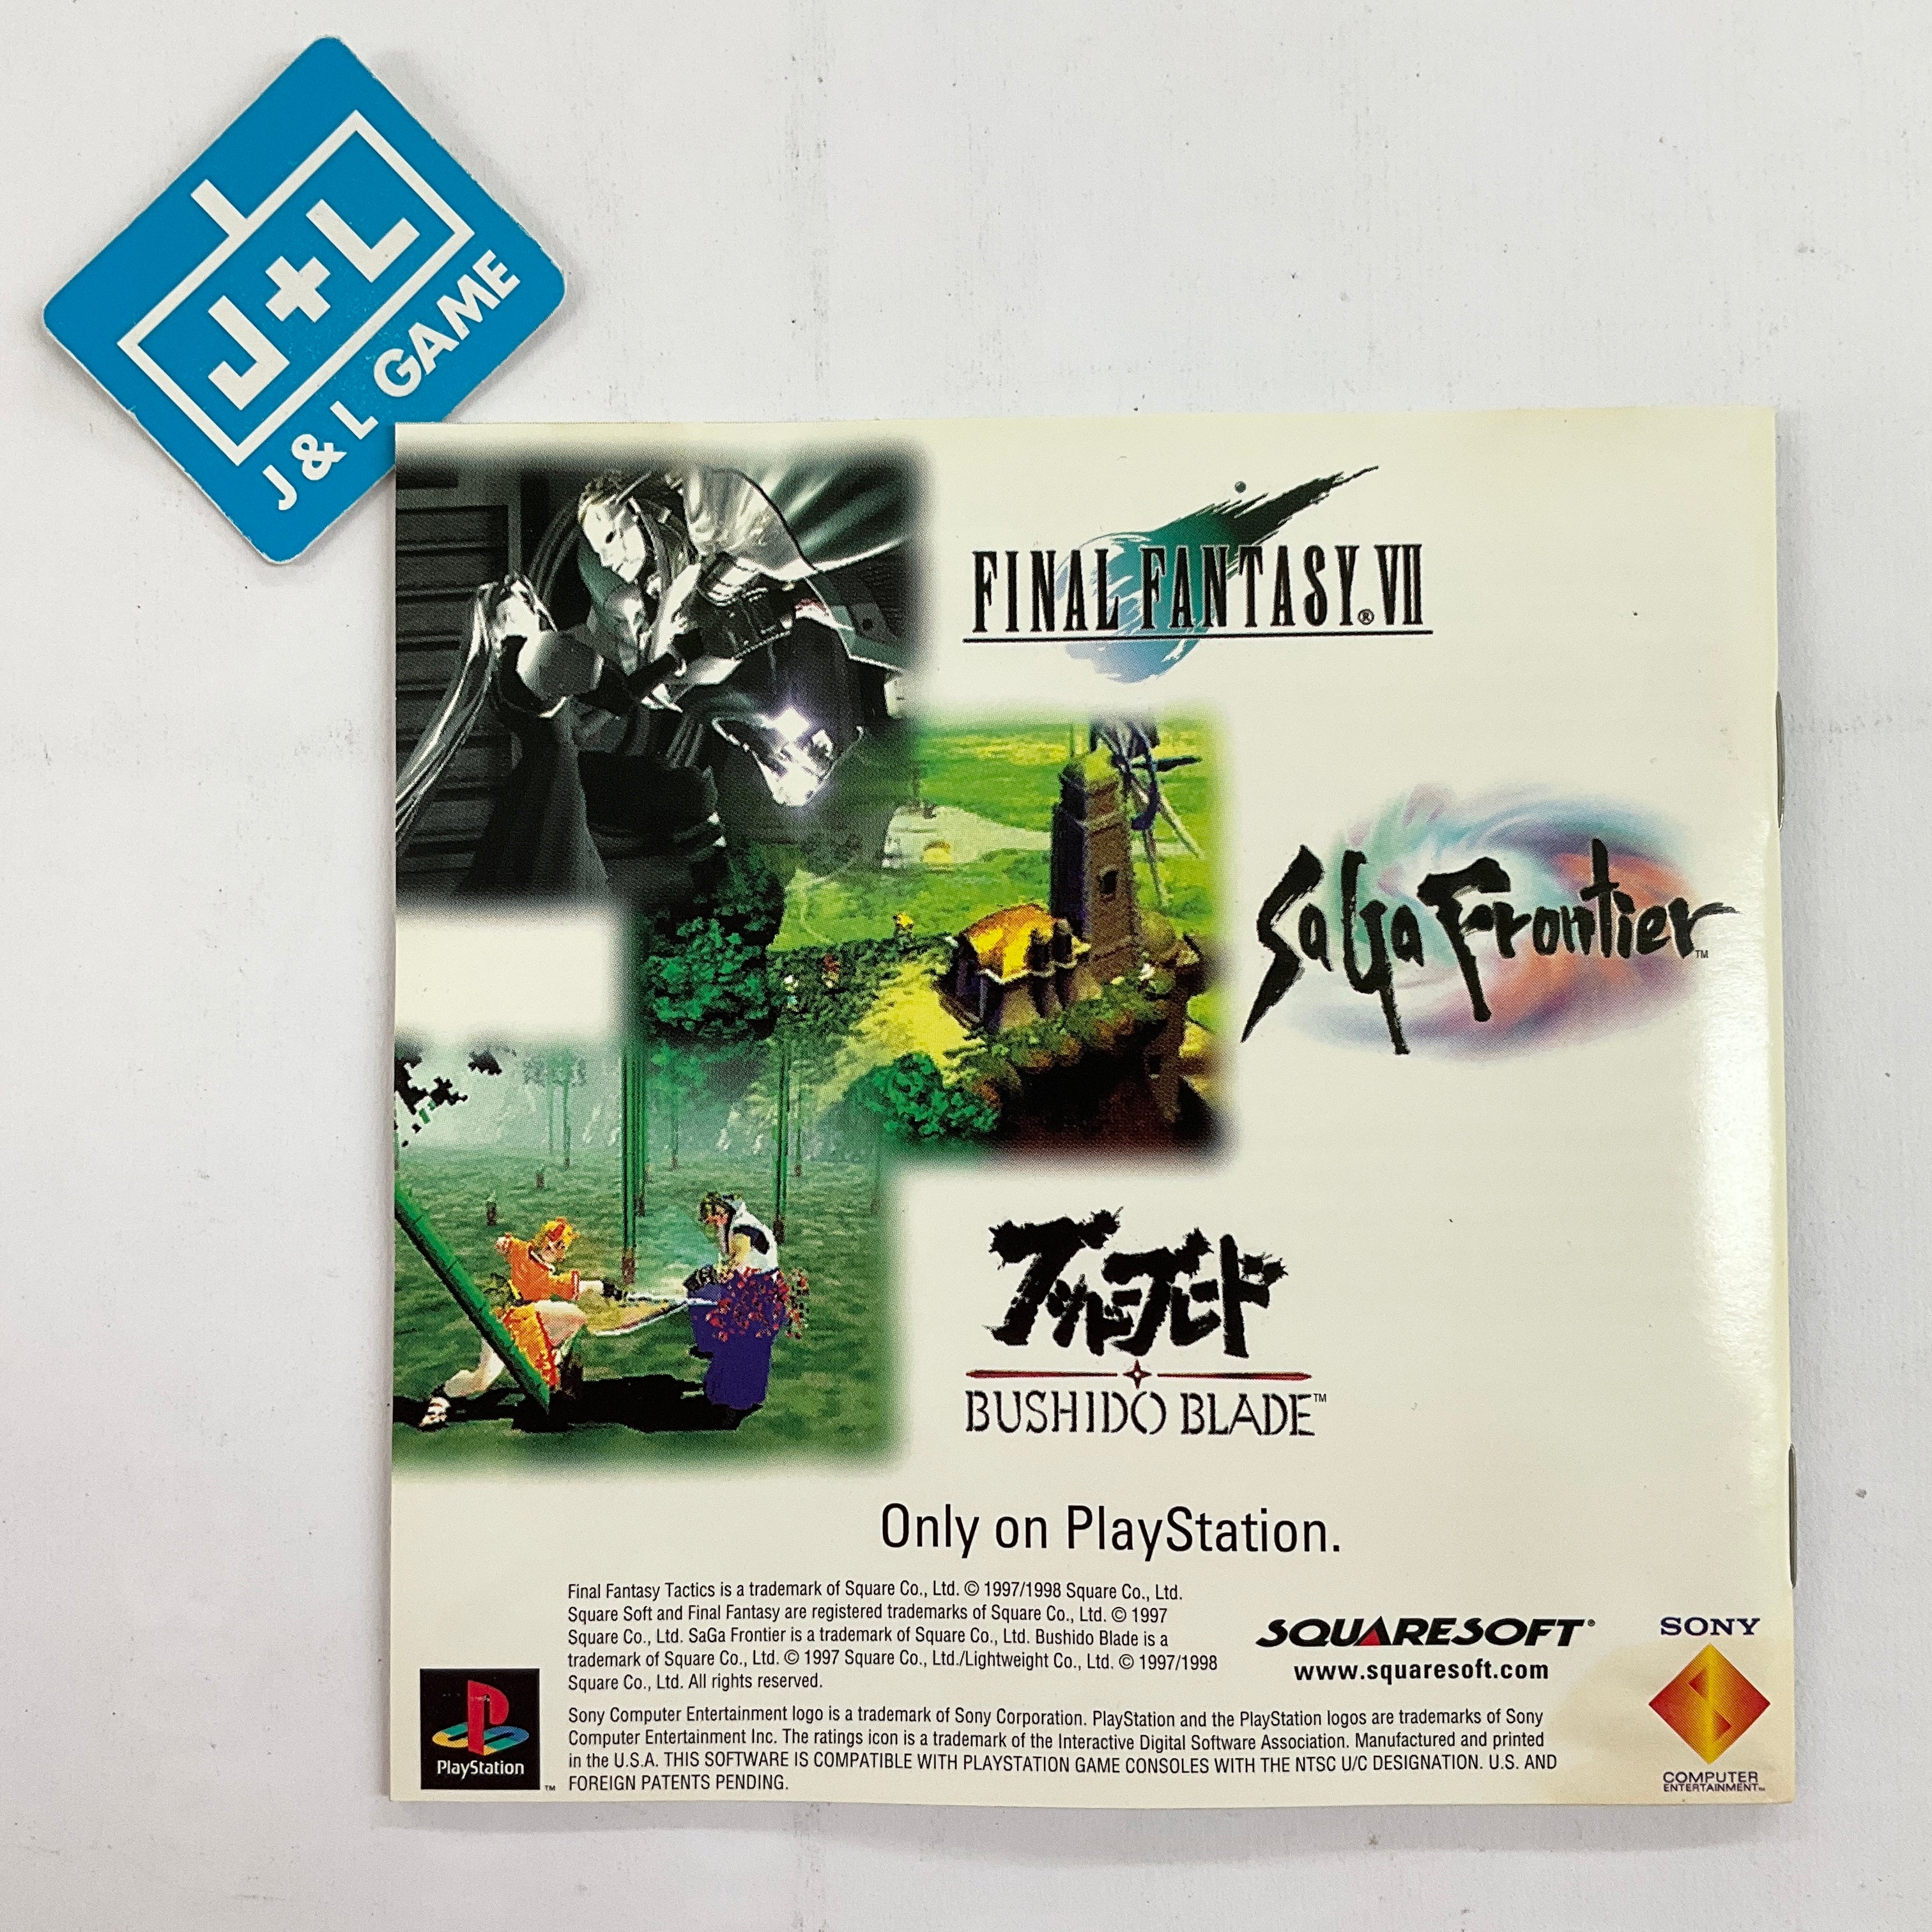 Final Fantasy Tactics - (PS1) PlayStation 1 [Pre-Owned] Video Games SquareSoft   